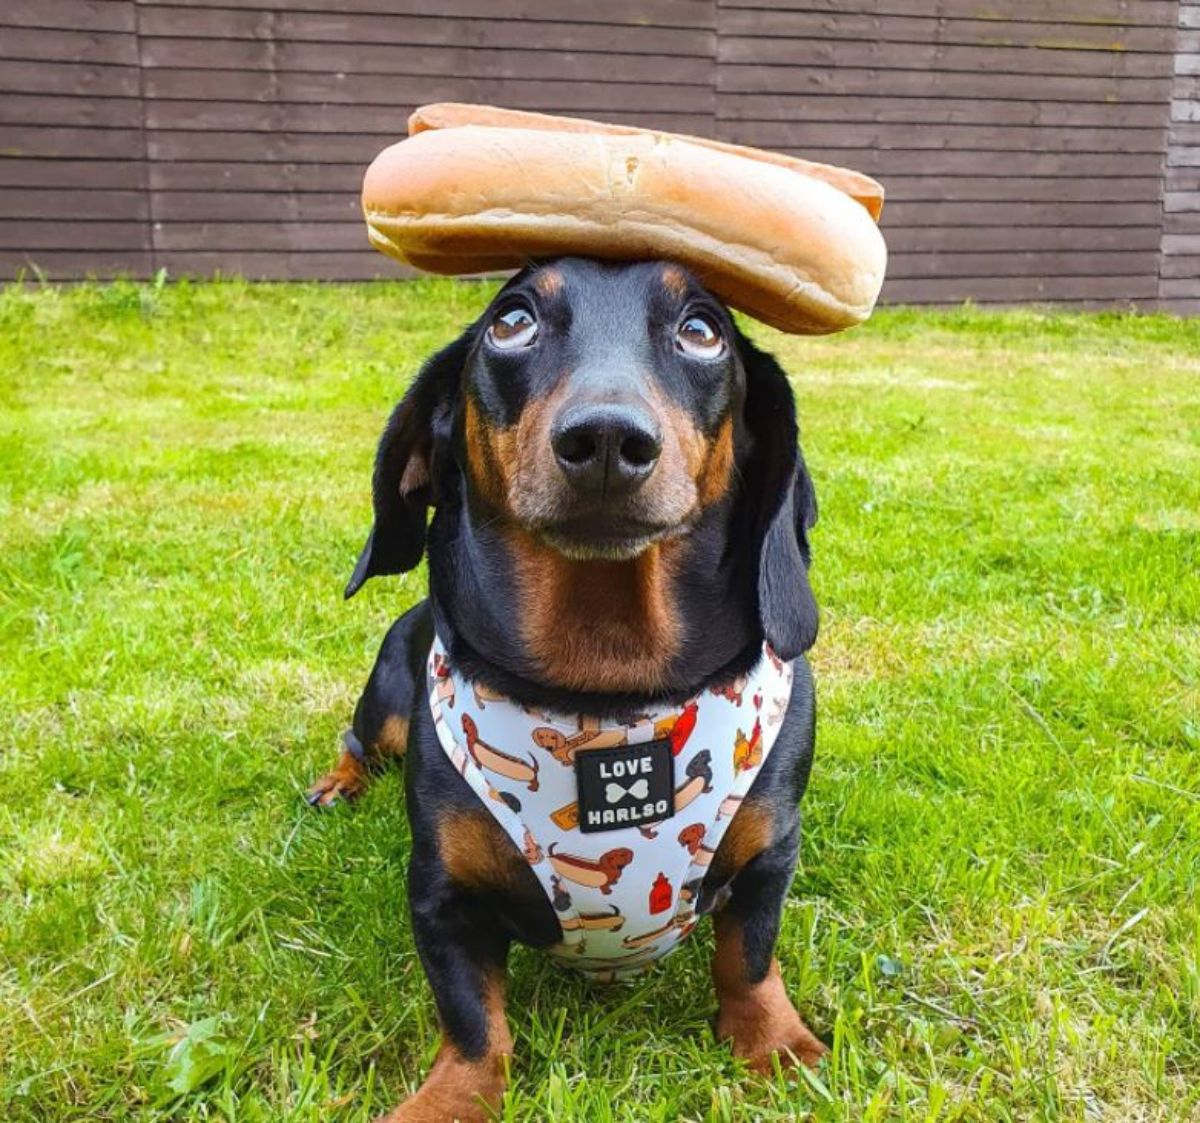 black and brown dachshund standing with a hotdog on the head and wearing a blue harness with a dachshund in a hotdog costume on the harness